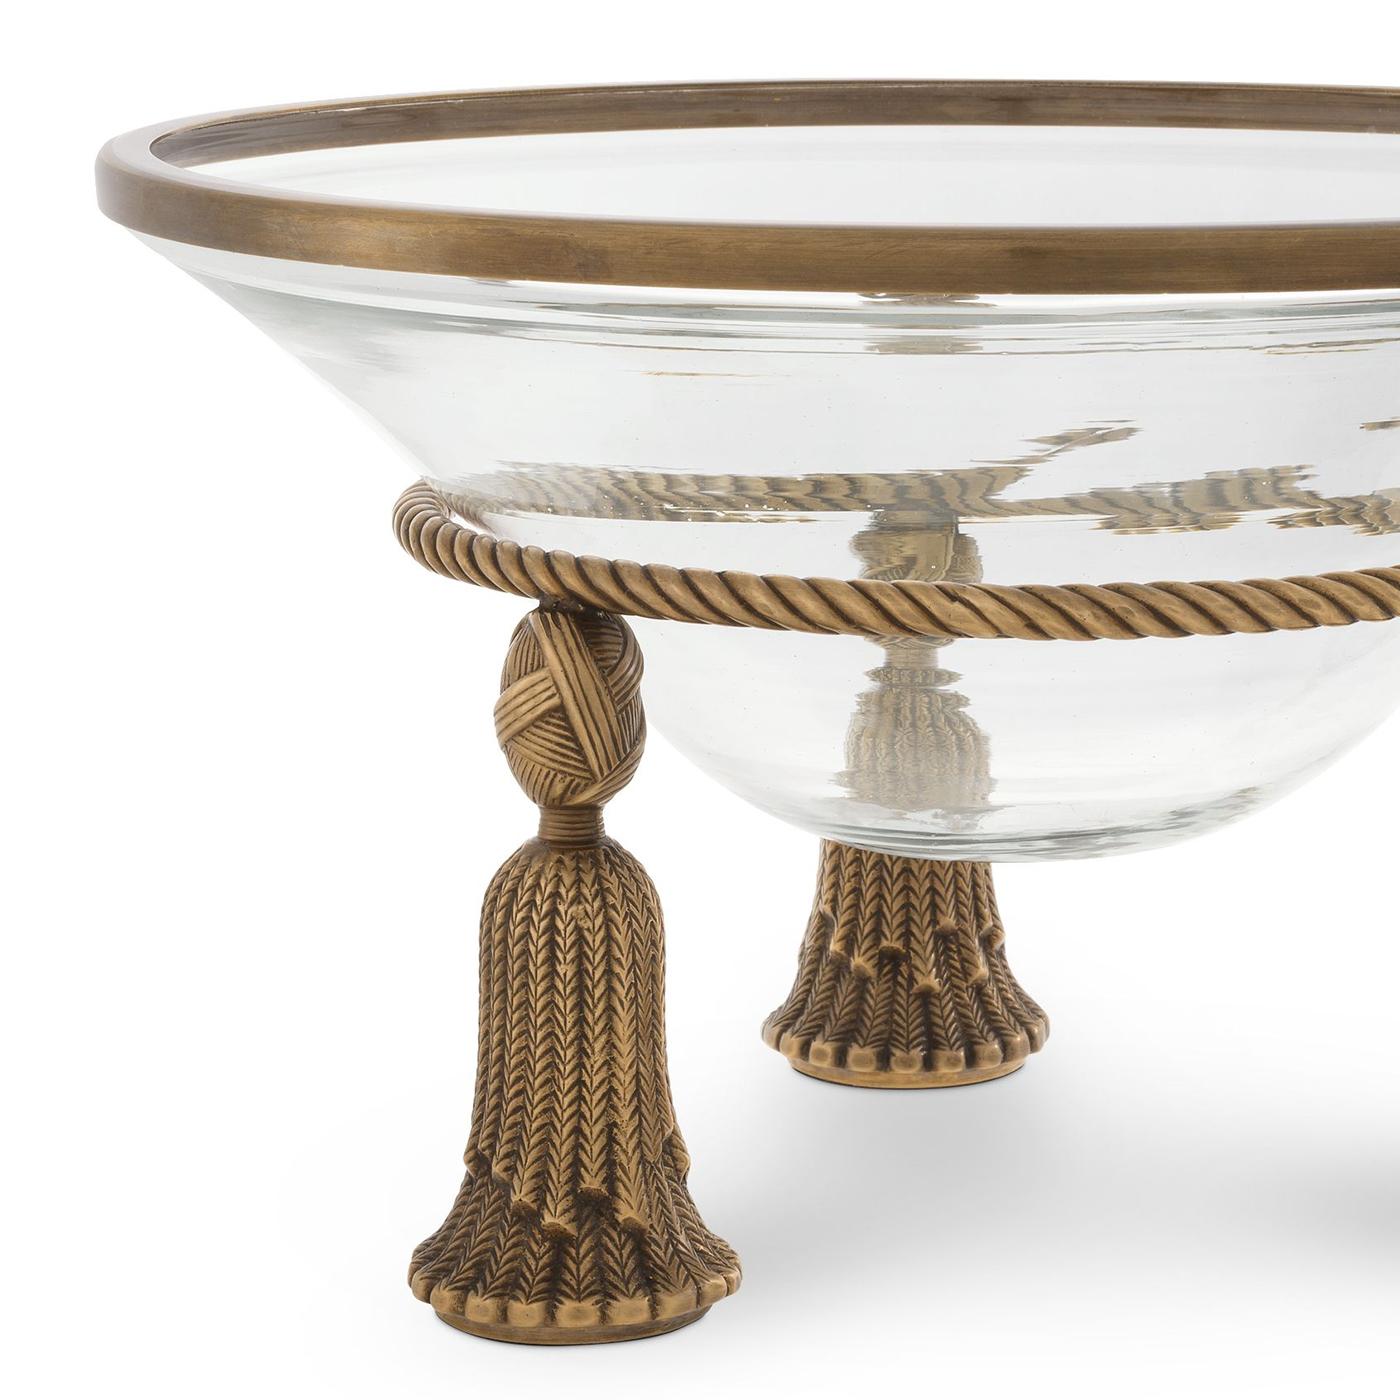 Bowl Tino with clear glass bowl and with
structure and deco in solid brass in old finish.